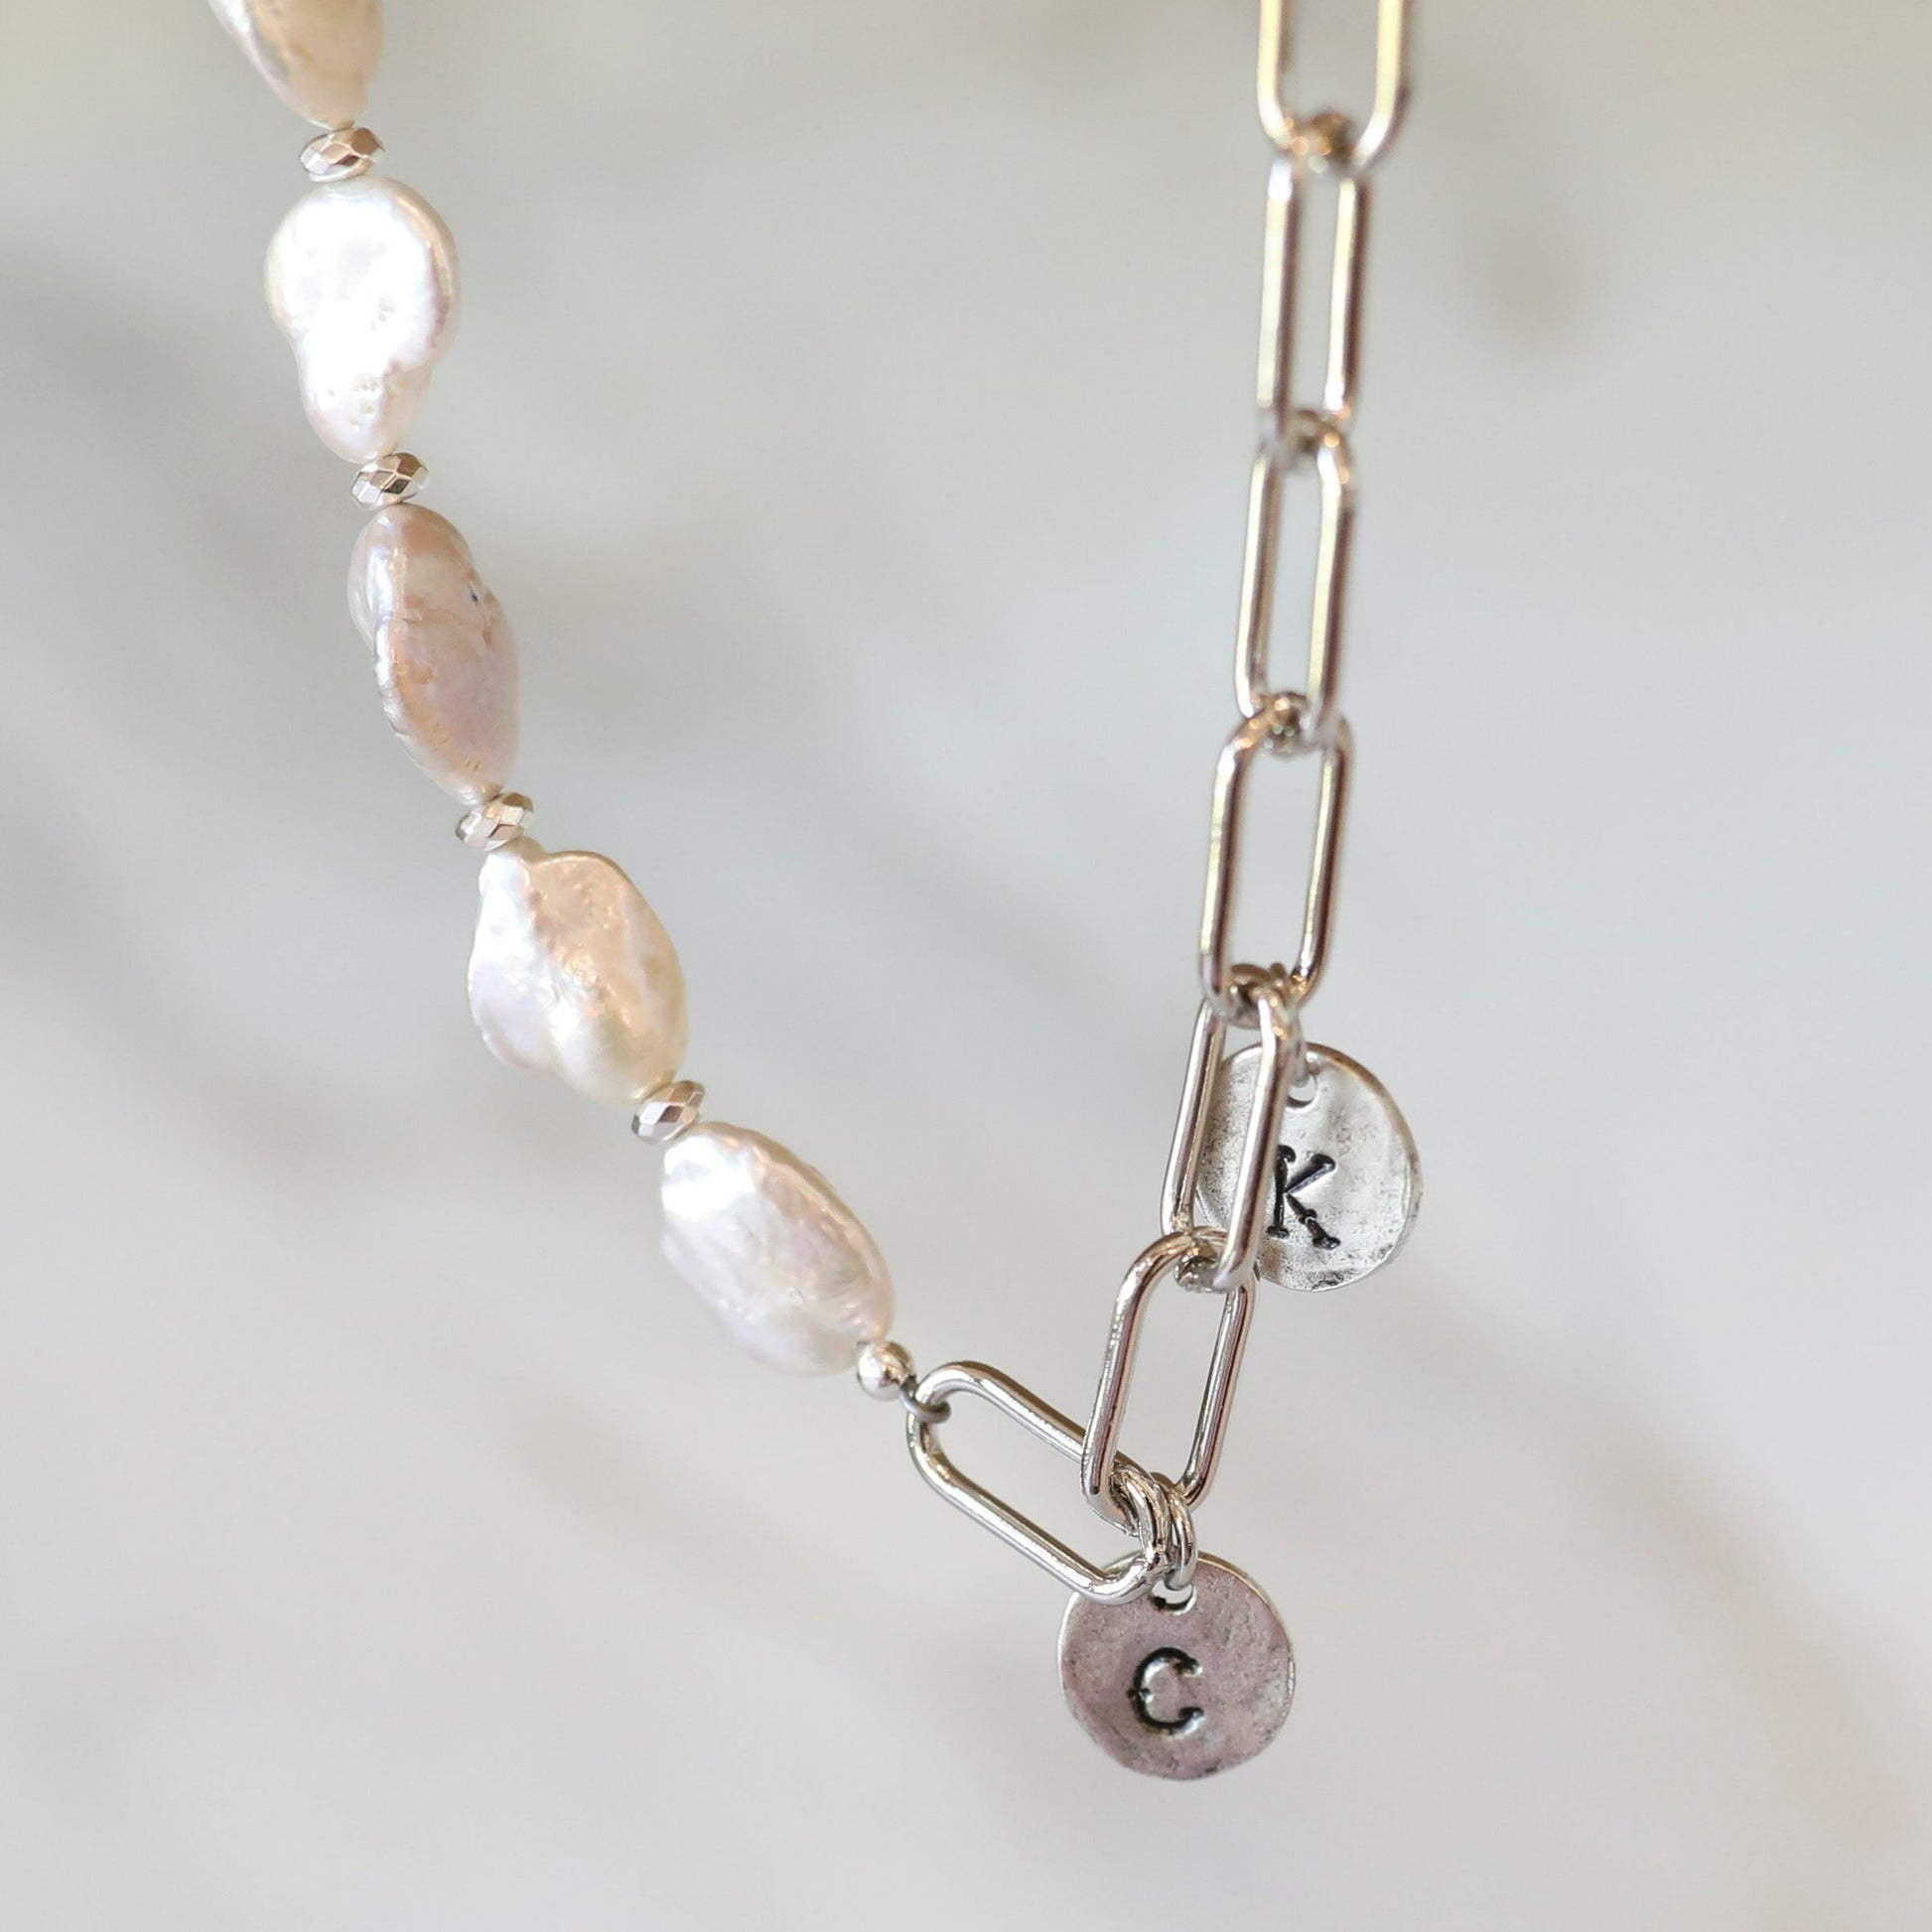 Personalized Asymmetrical Pearl Charm Necklace in Silver